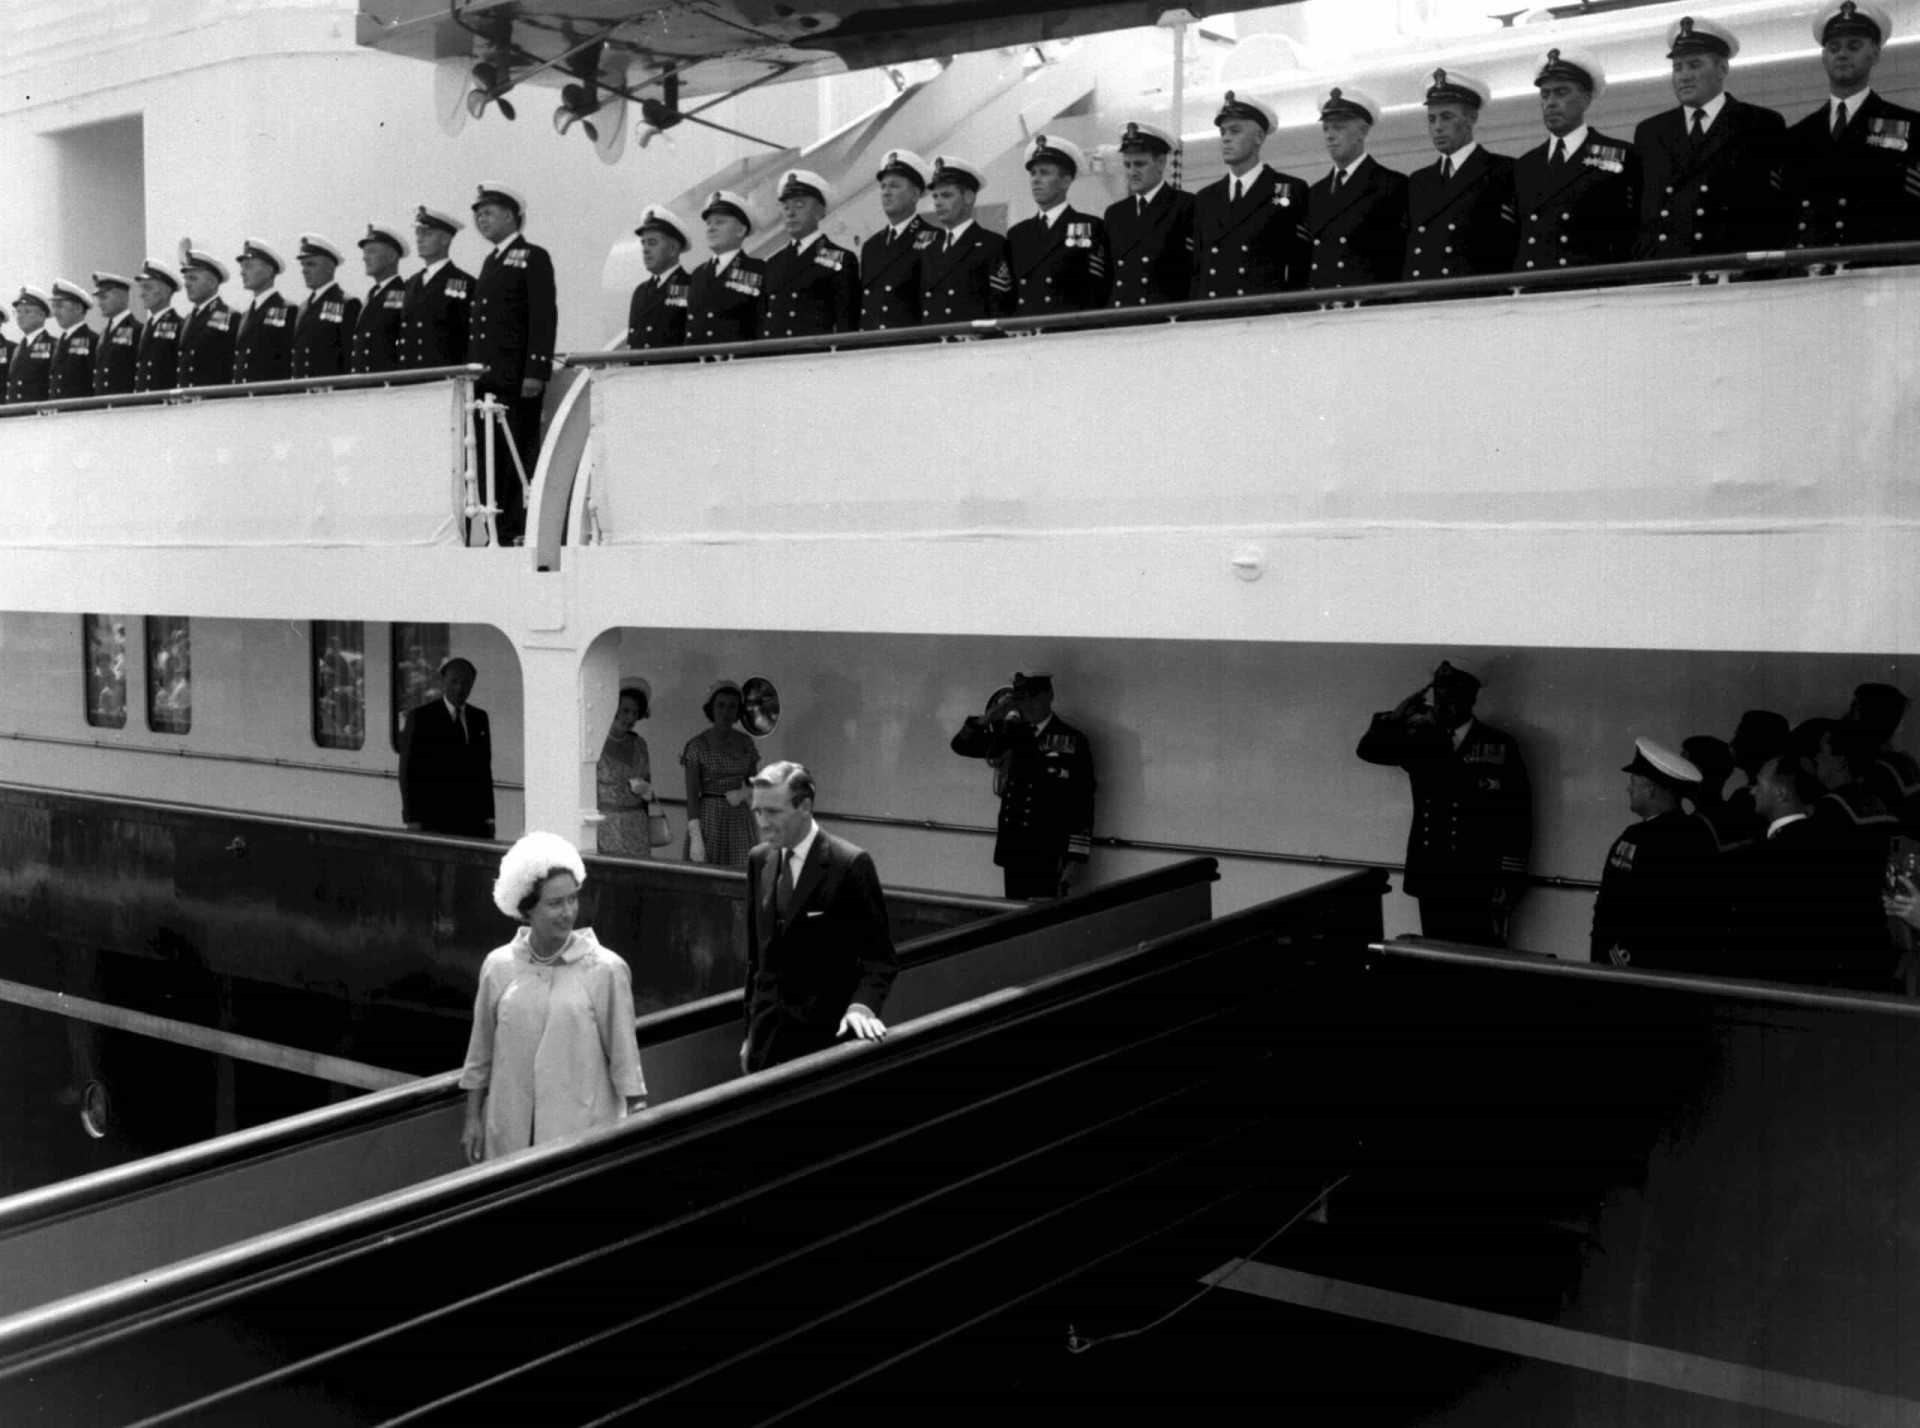 <p>HMY <em>Britannia</em> soon proved her worth as an ideal honeymoon cruise vessel. Princess Margaret and her husband, Antony Armstrong-Jones, 1st Earl of Snowdon, were the first royal couple to enjoy their honeymoon at sea, in 1960. Their voyage started a tradition where the yacht could access secluded locations away from the world's press to provide just-married British royalty with the privacy they desired.</p><p><a href="https://www.msn.com/en-us/community/channel/vid-7xx8mnucu55yw63we9va2gwr7uihbxwc68fxqp25x6tg4ftibpra?cvid=94631541bc0f4f89bfd59158d696ad7e">Follow us and access great exclusive content every day</a></p>